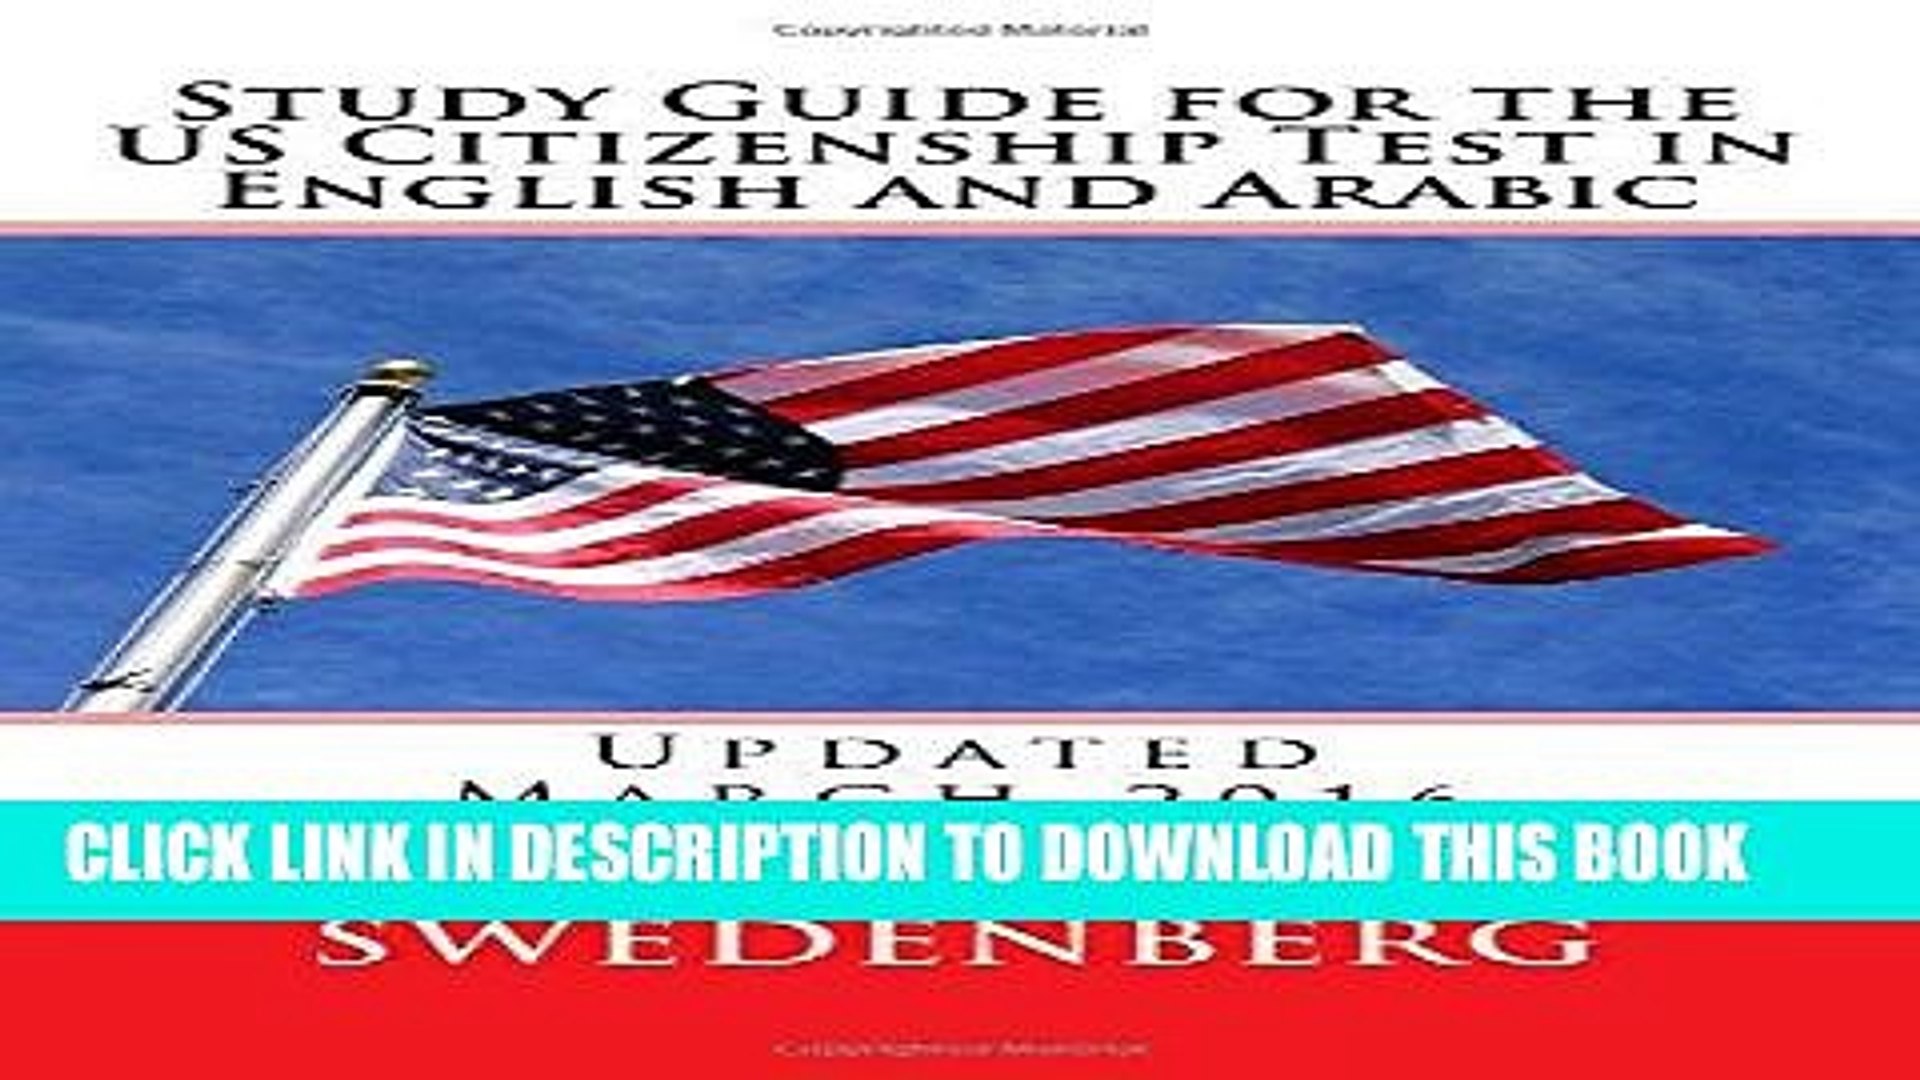 [PDF] Study Guide for the US Citizenship Test in English and Arabic: Updated March 2016 (Study